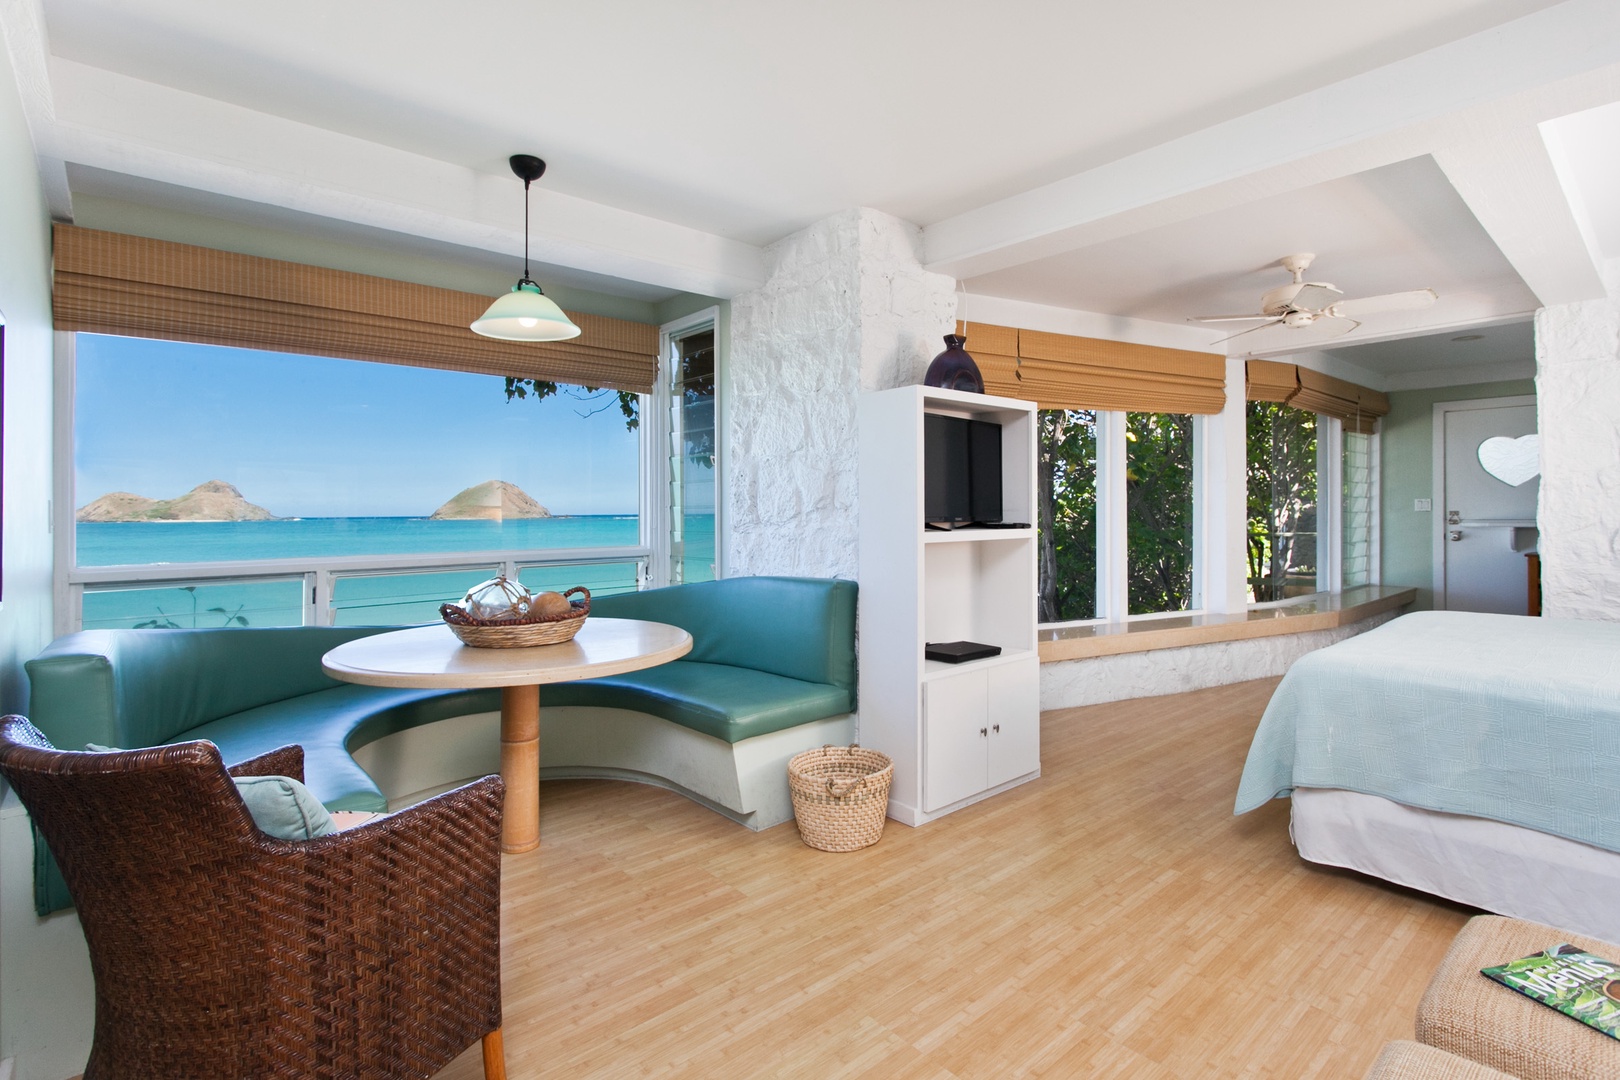 Kailua Vacation Rentals, Lanikai Village* - Hale Kainalu: Cozy primary suite breakfast nook with a built-in bench and stunning ocean views for a serene start to the day.